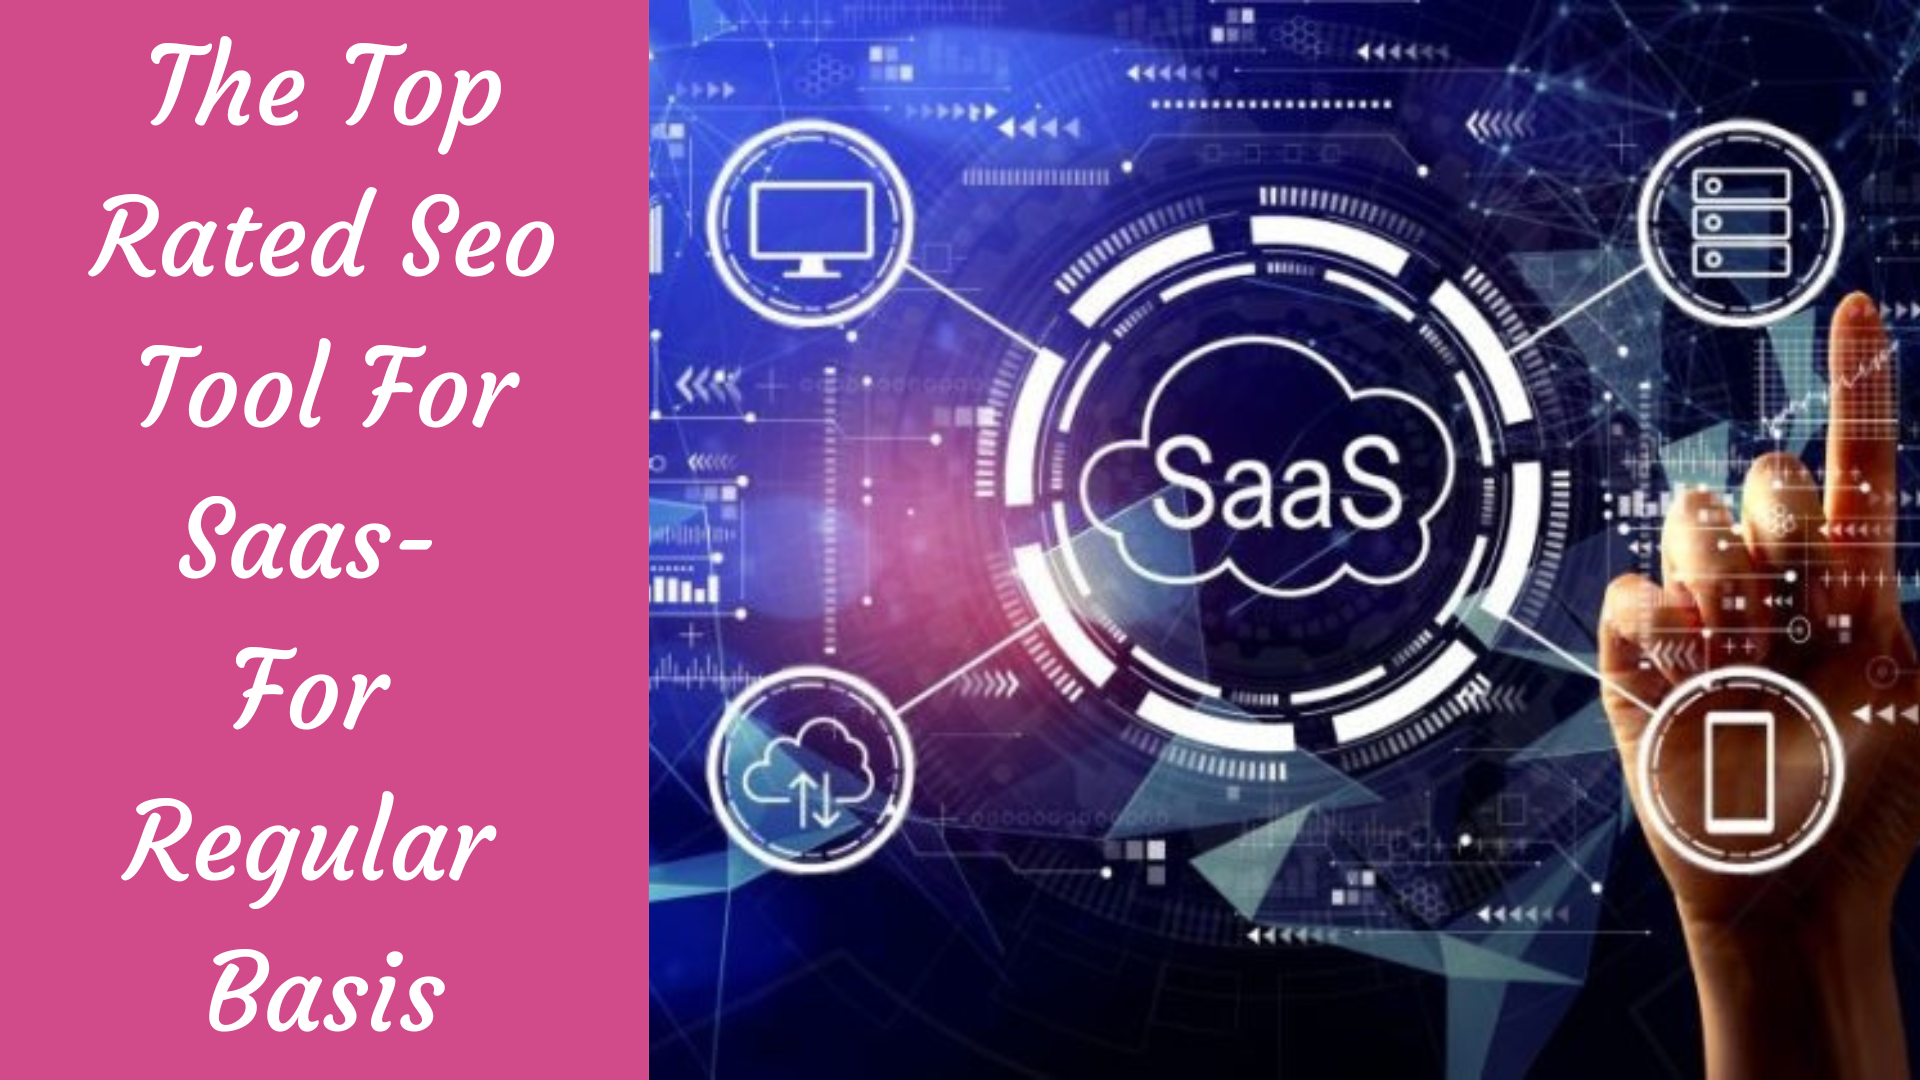 You are currently viewing The Top Rated Seo Tool For Saas- For Regular Basis